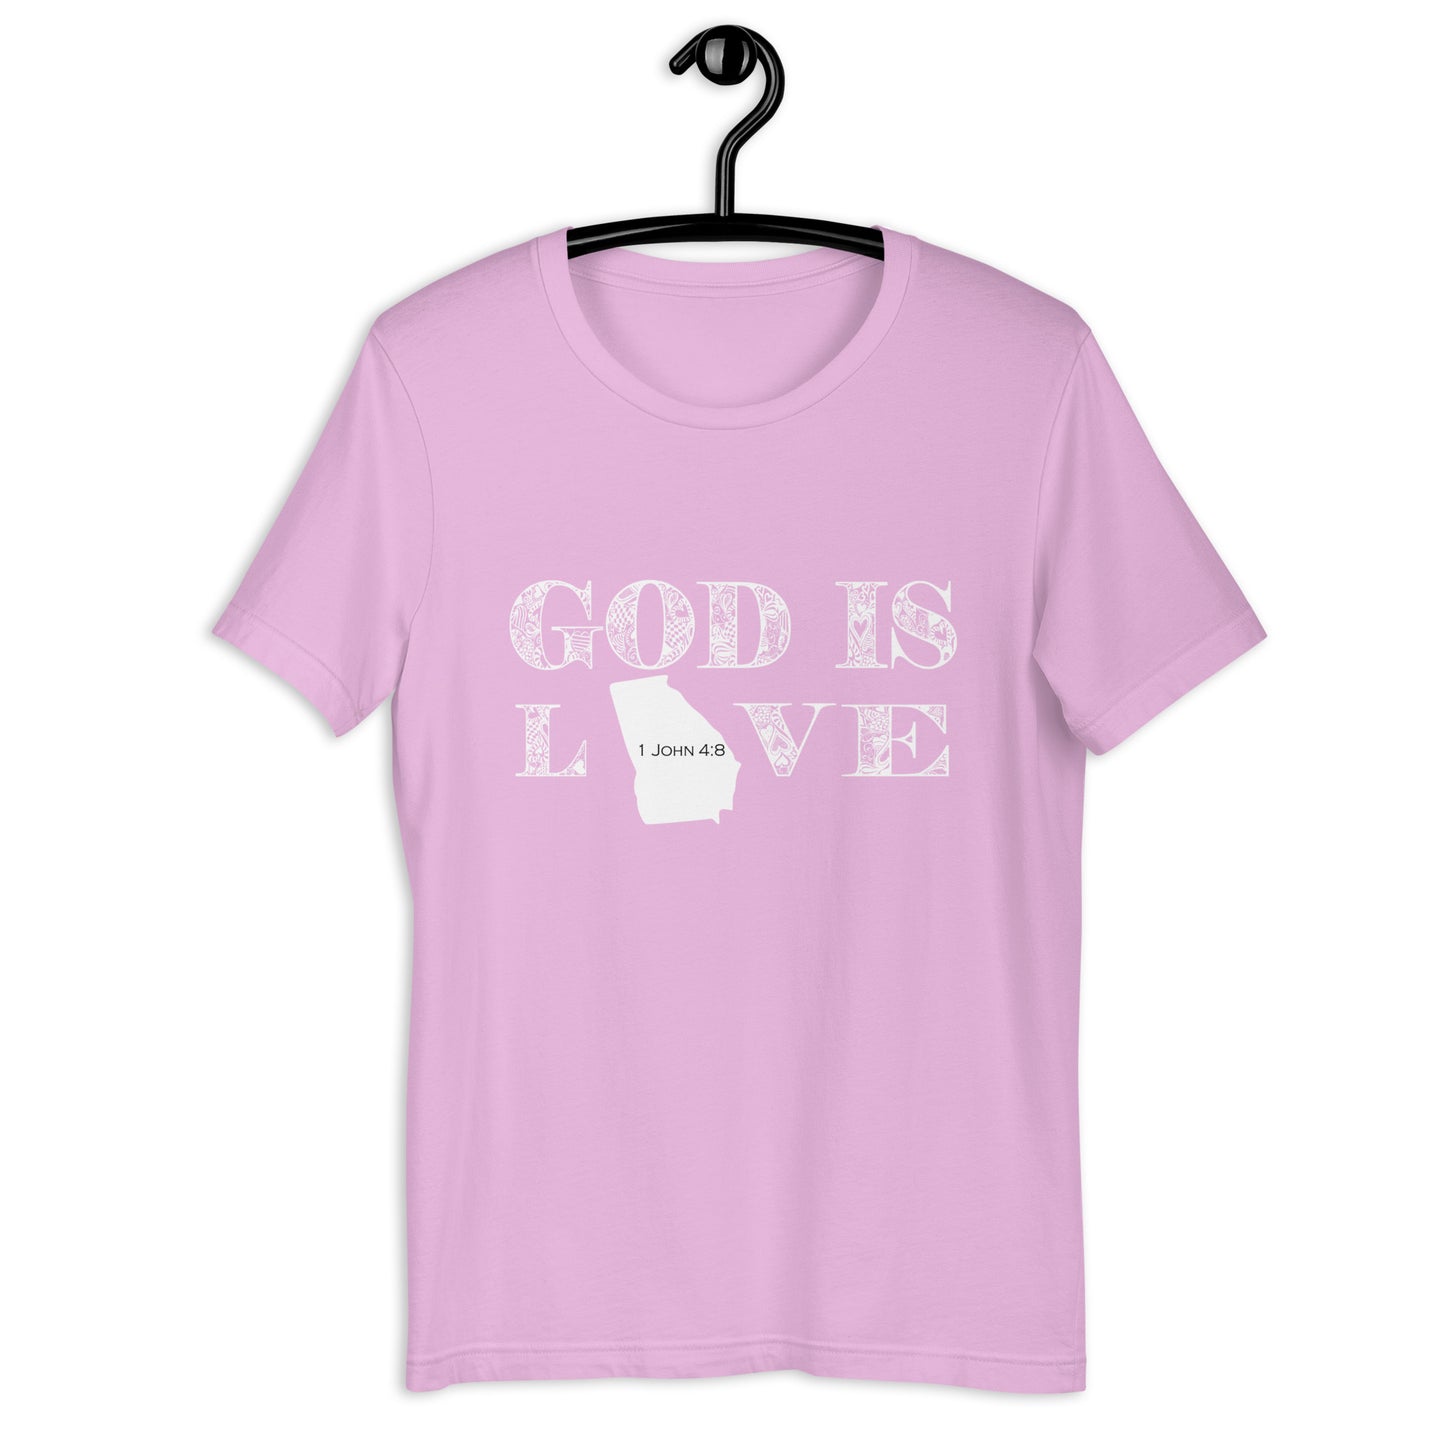 1 John 4:8 God is love Georgia T-shirt in Lilac - on hanger front view